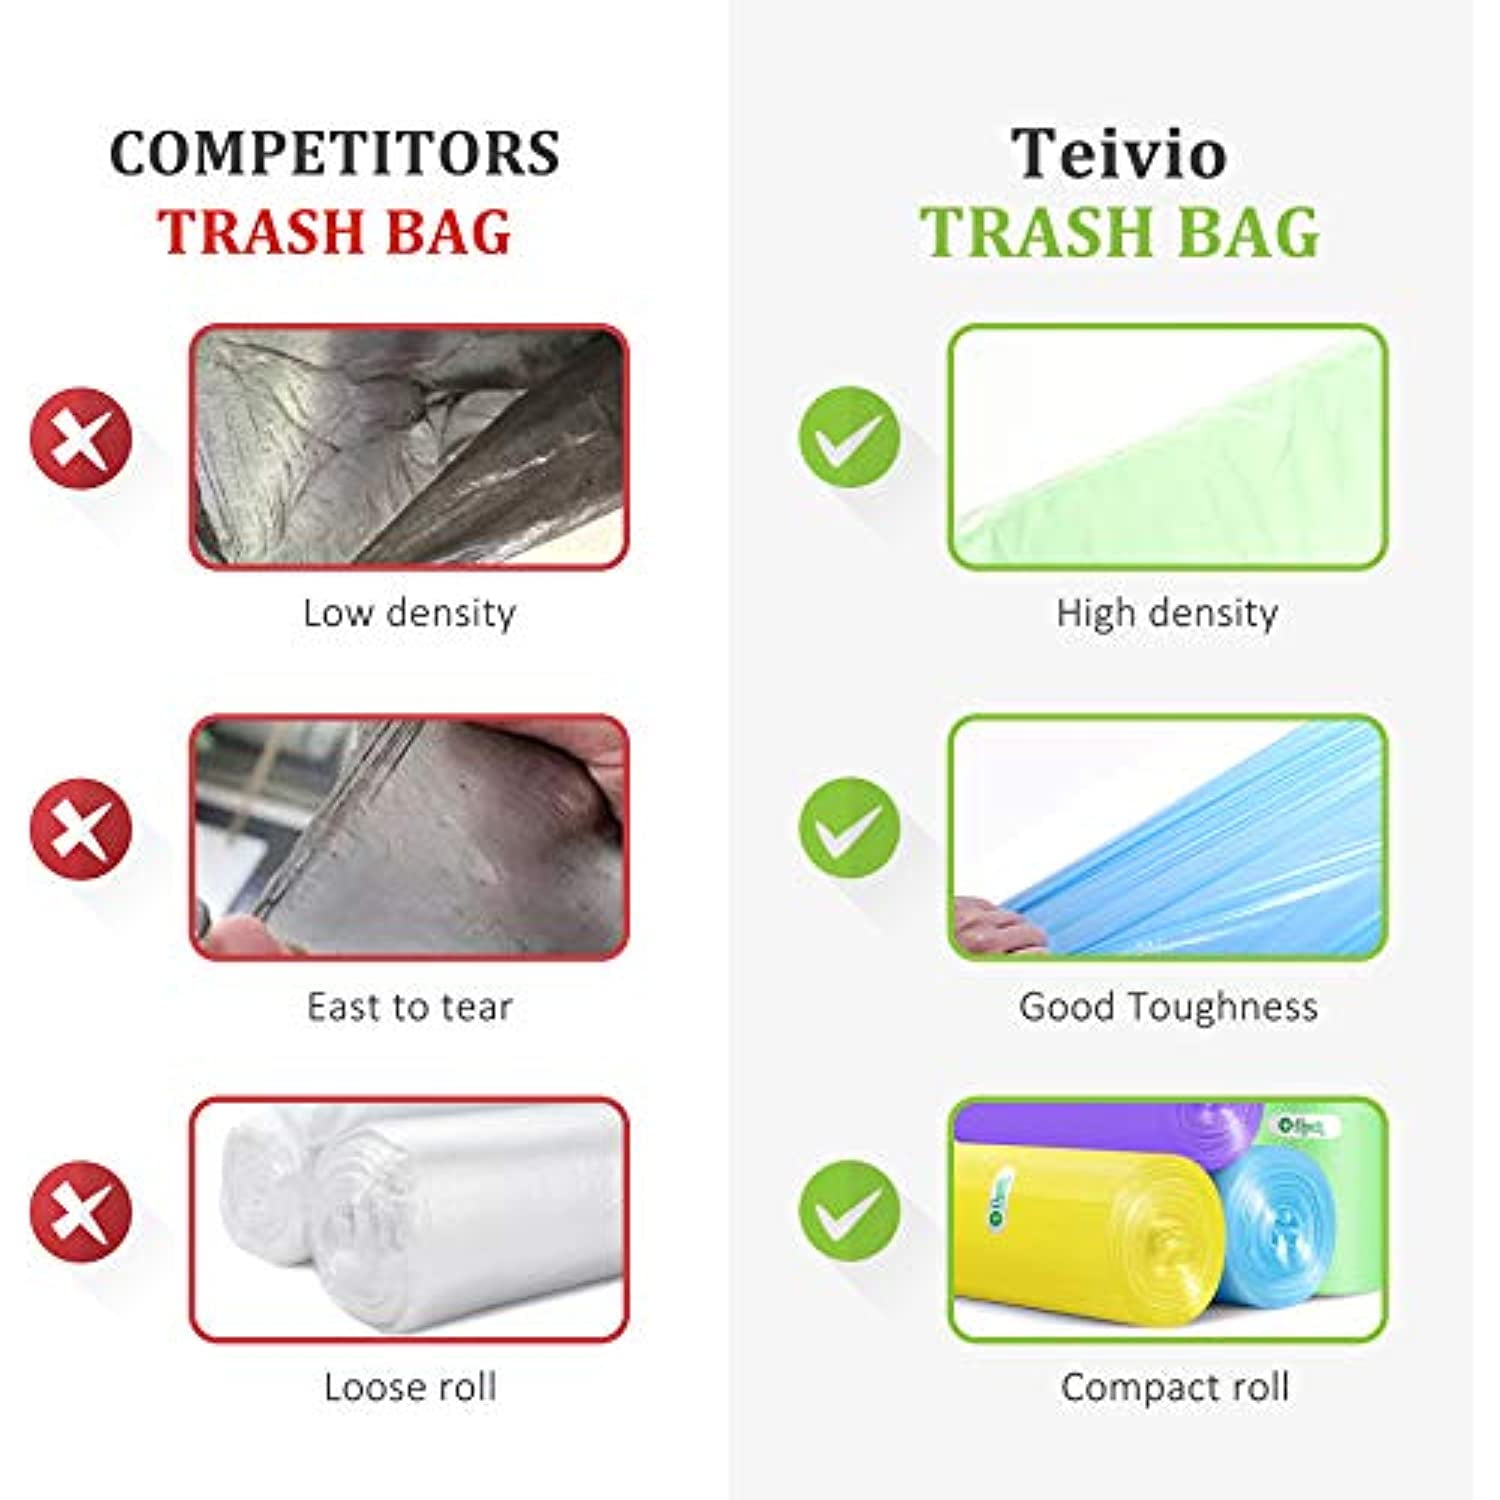 1.3 Gallon 100 Counts Strong Trash Bags Garbage Bags by Teivio, Bathroom  Trash Can Bin Liners, Plastic Bags for home office kitchen, Clear